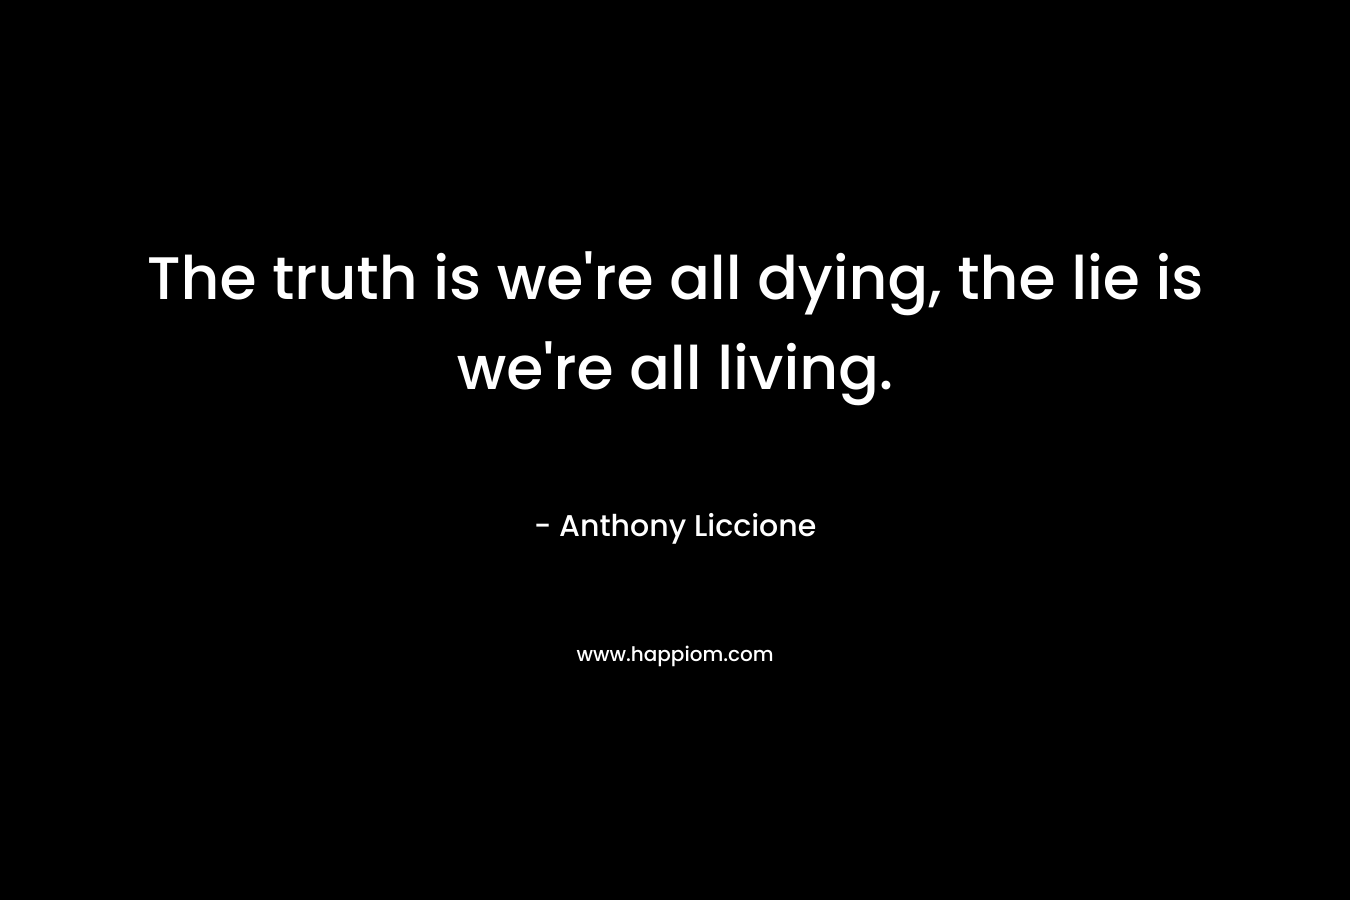 The truth is we're all dying, the lie is we're all living.